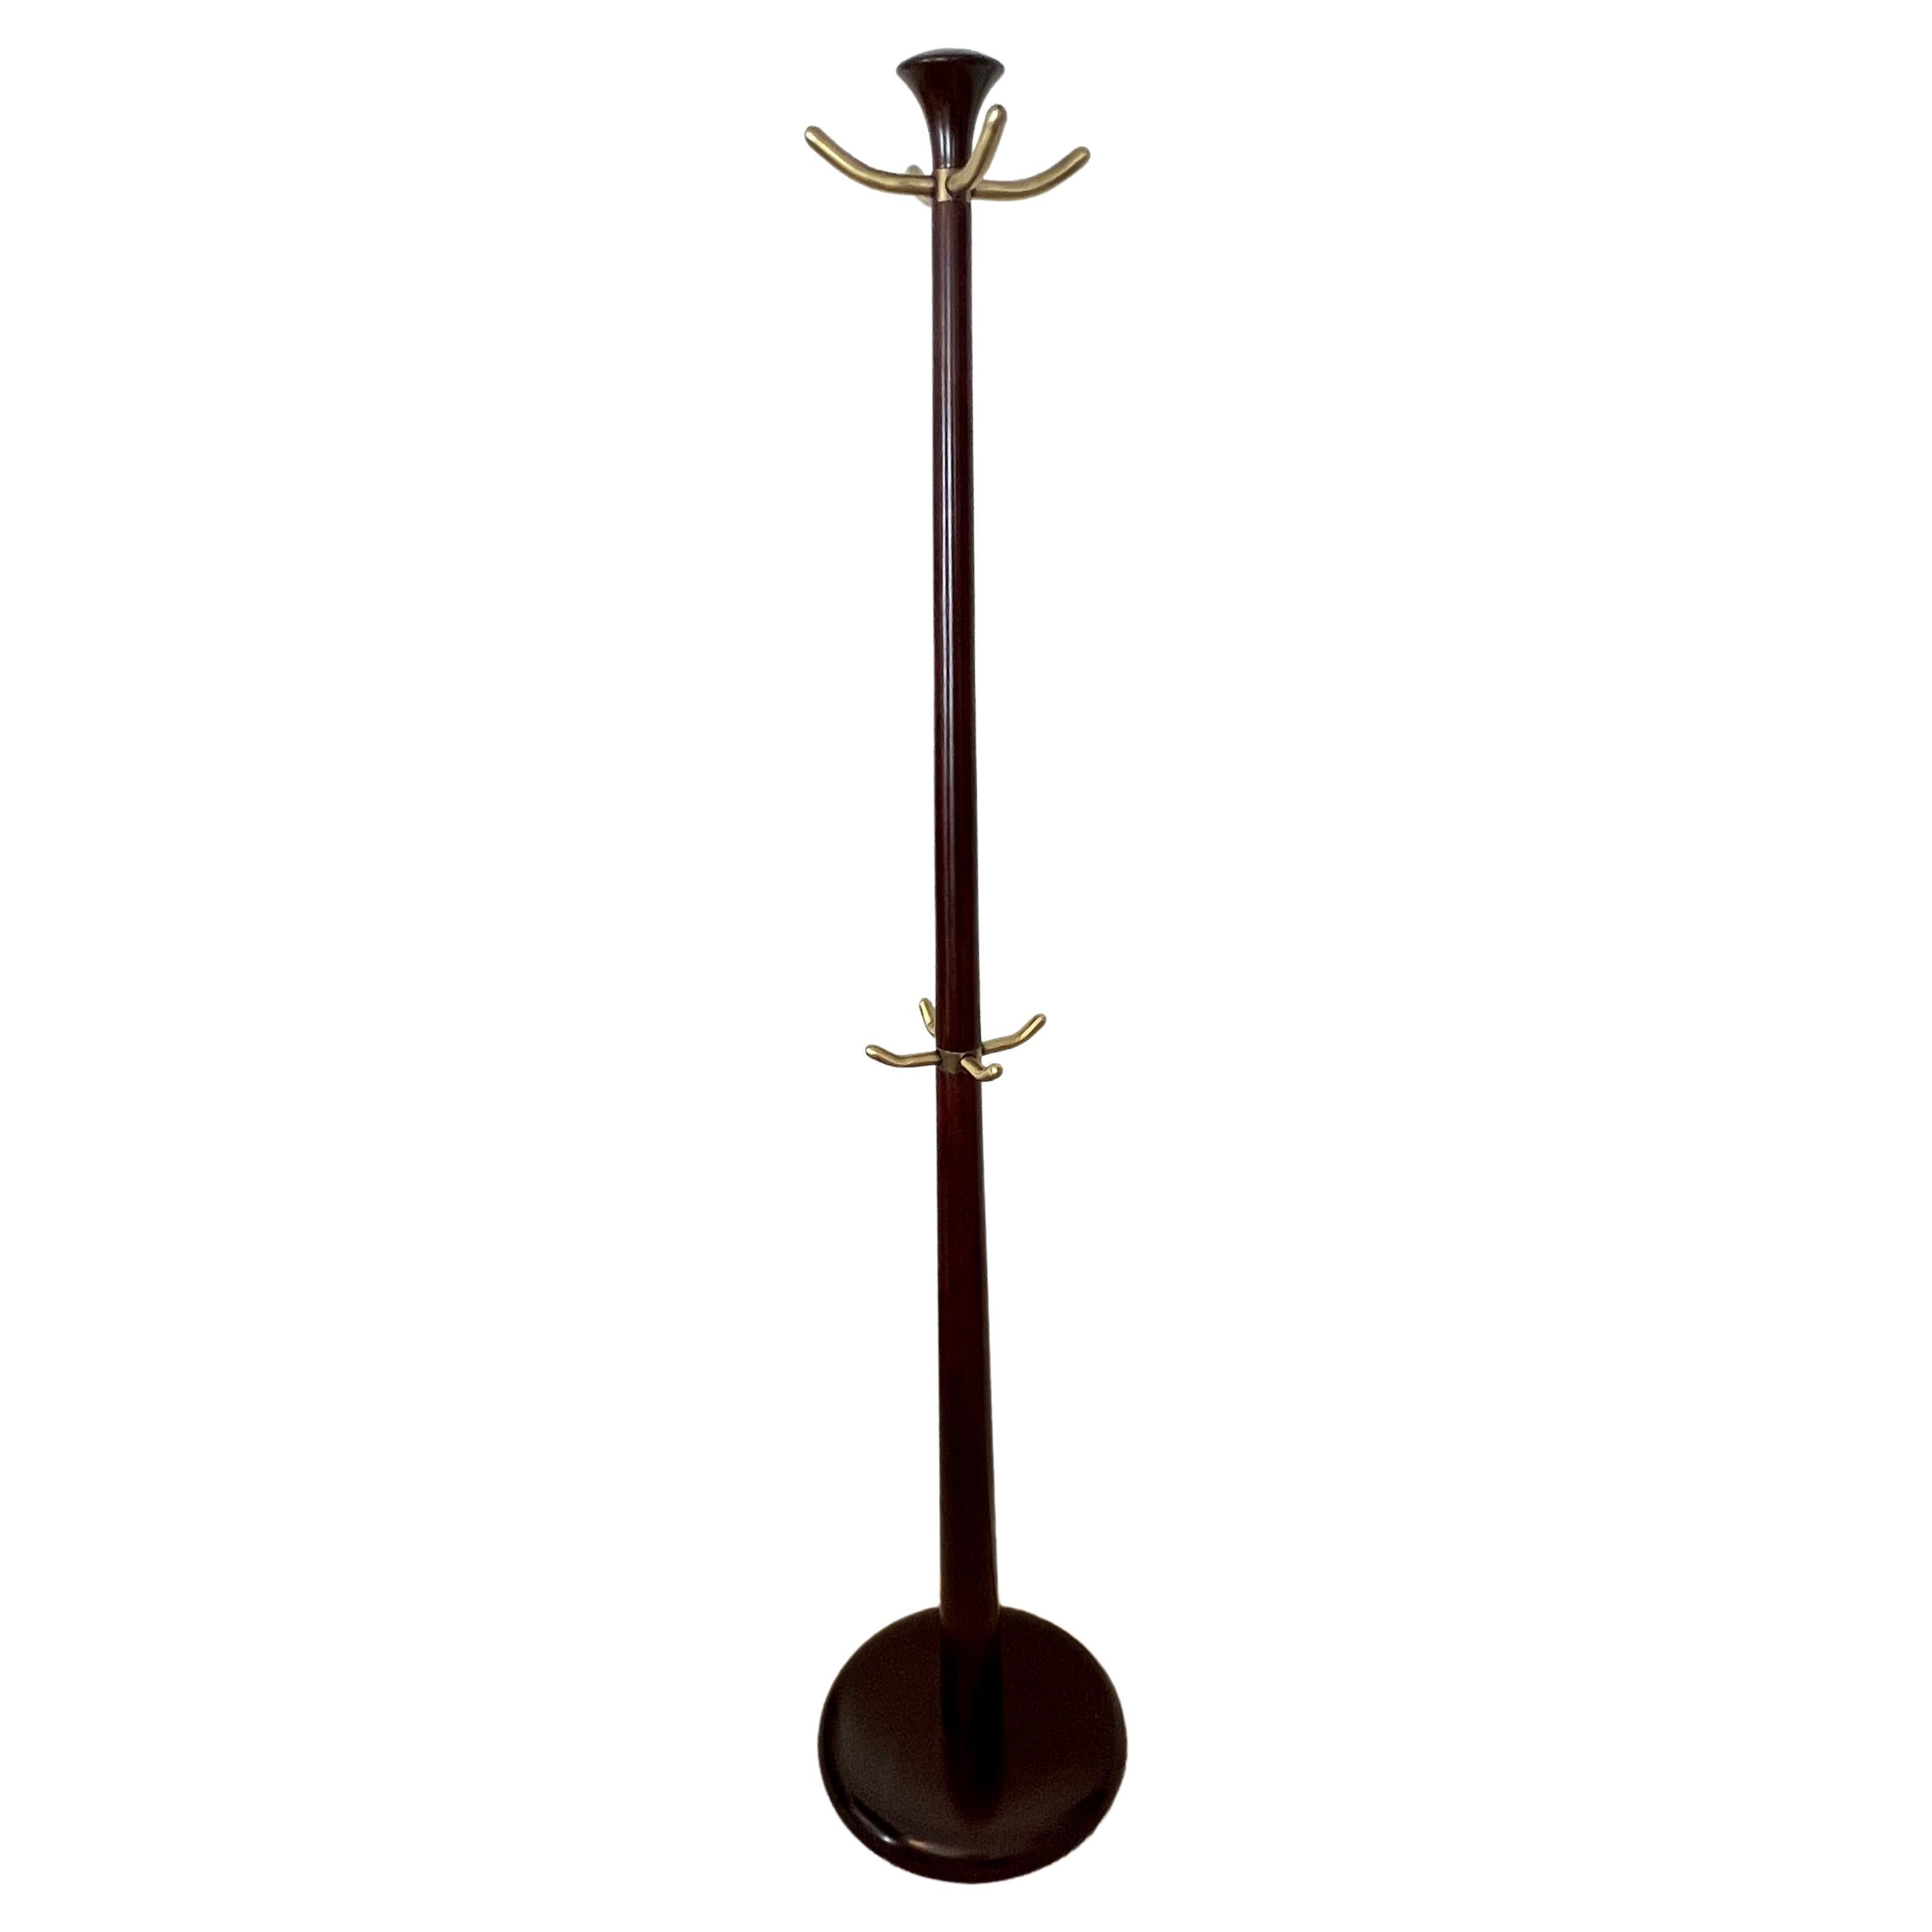 Wood and Brass Coat Rack in the Style of Italian 1940's